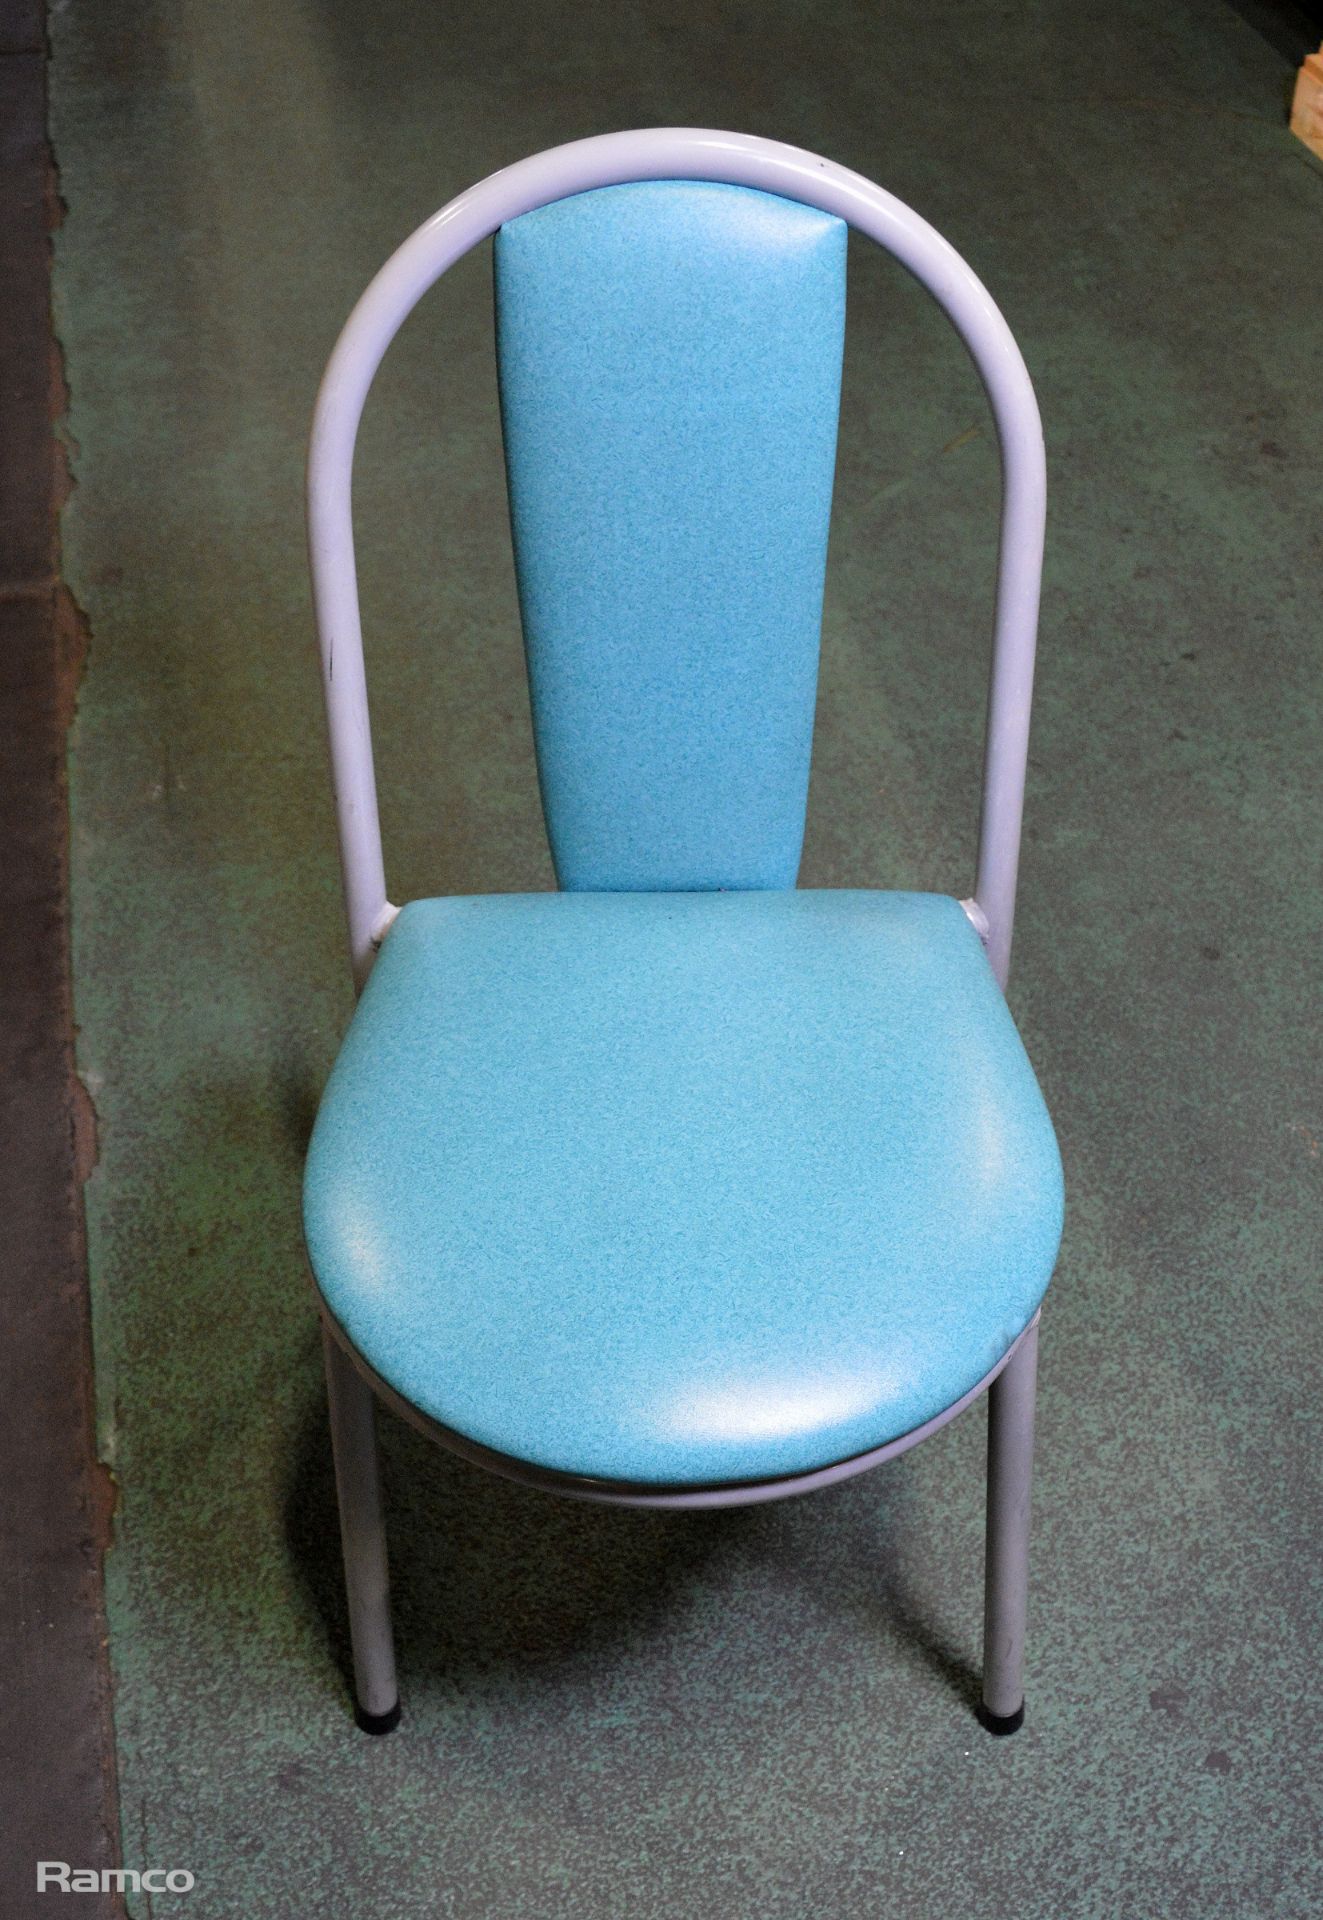 24x Chair Gray Metal Frame with green Padded Seats - Image 5 of 5